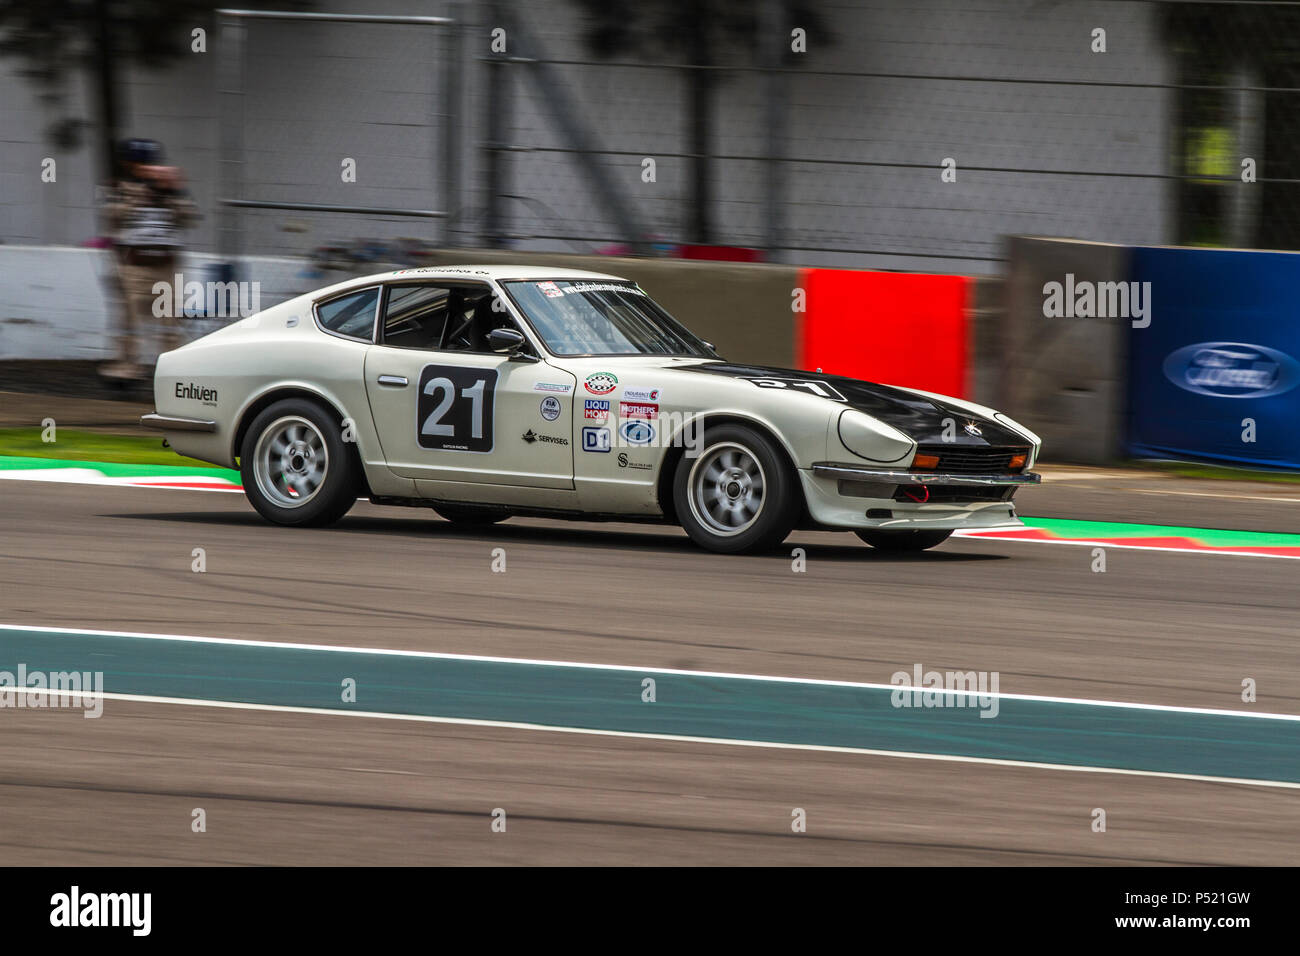 Mexico City, Mexico – September 01, 2017: Autodromo Hermanos Rodriguez. FIA World Endurance Championship WEC. 1973 Datsun 240Z No. 21 running at the free practice for the Mexico Vintage Series. Stock Photo